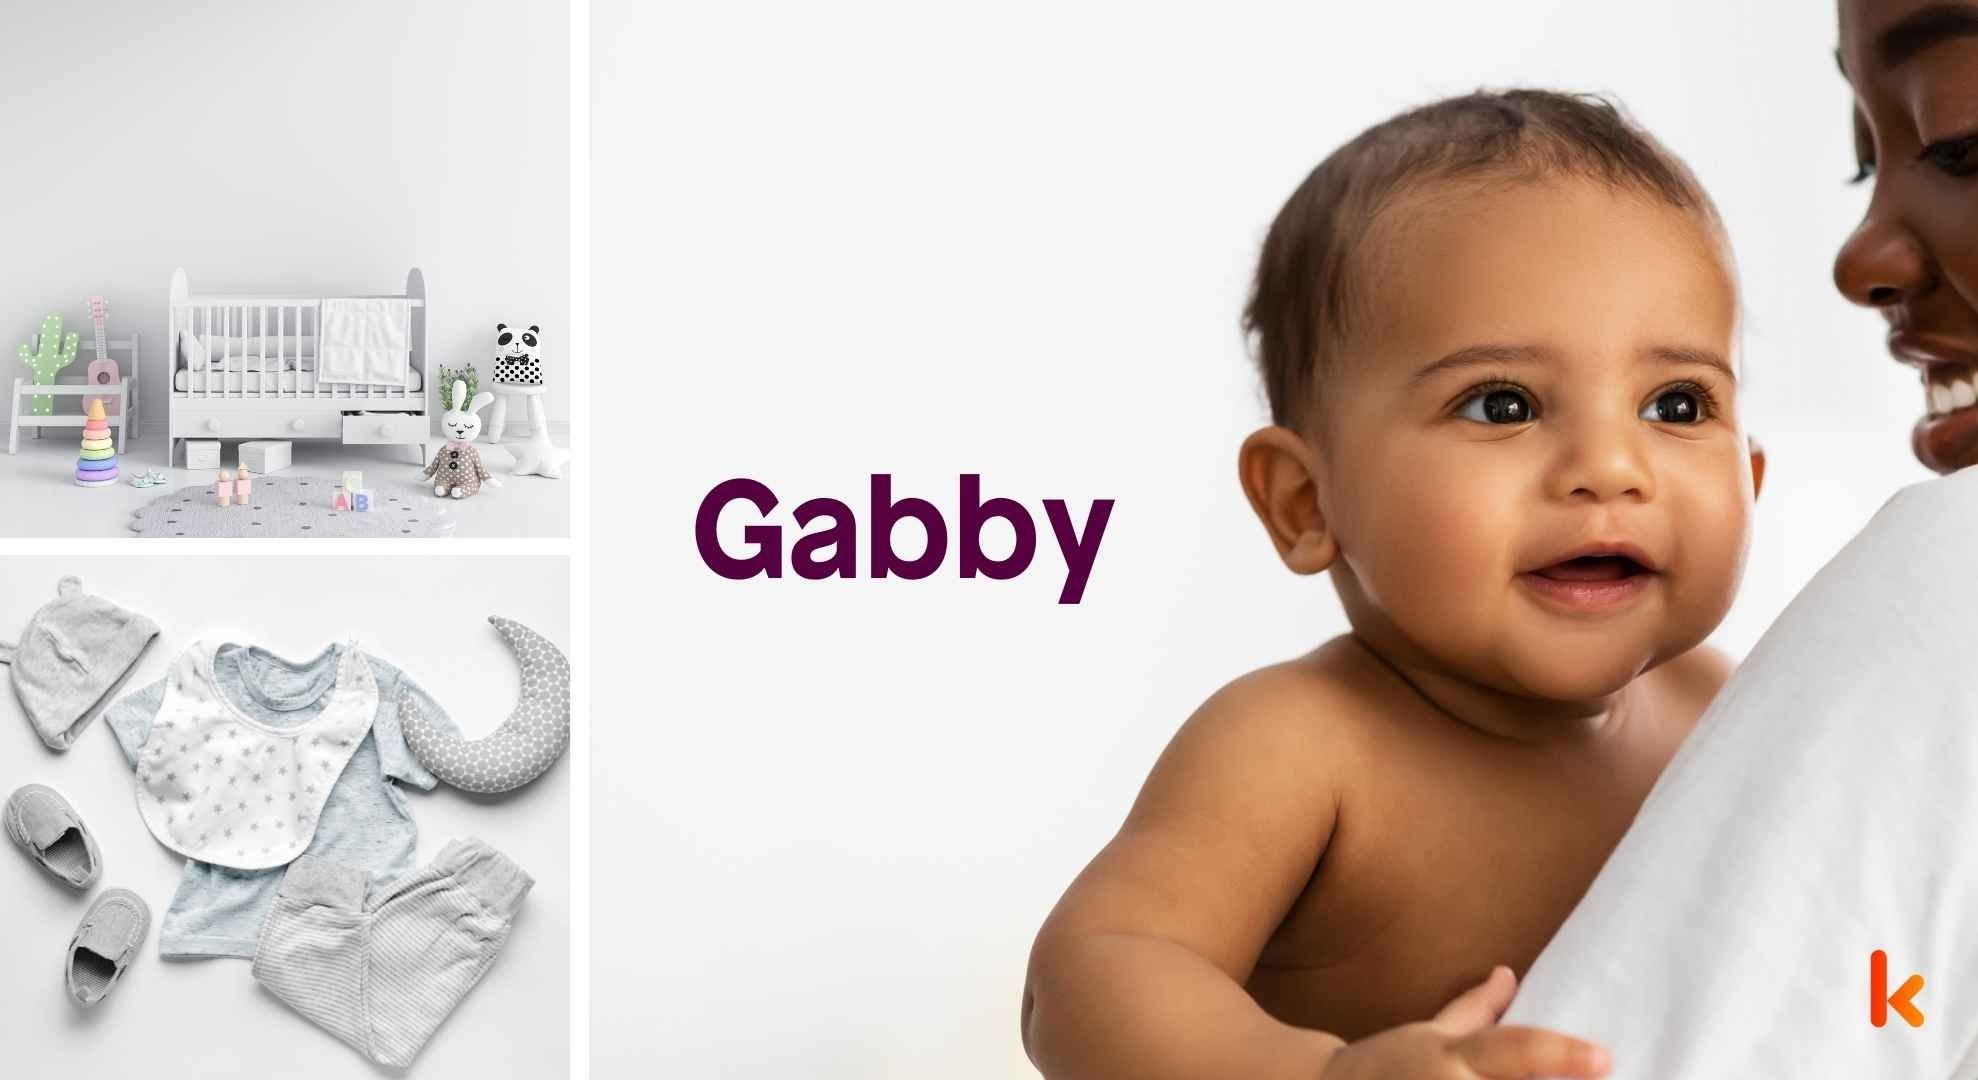 Meaning of the name Gabby